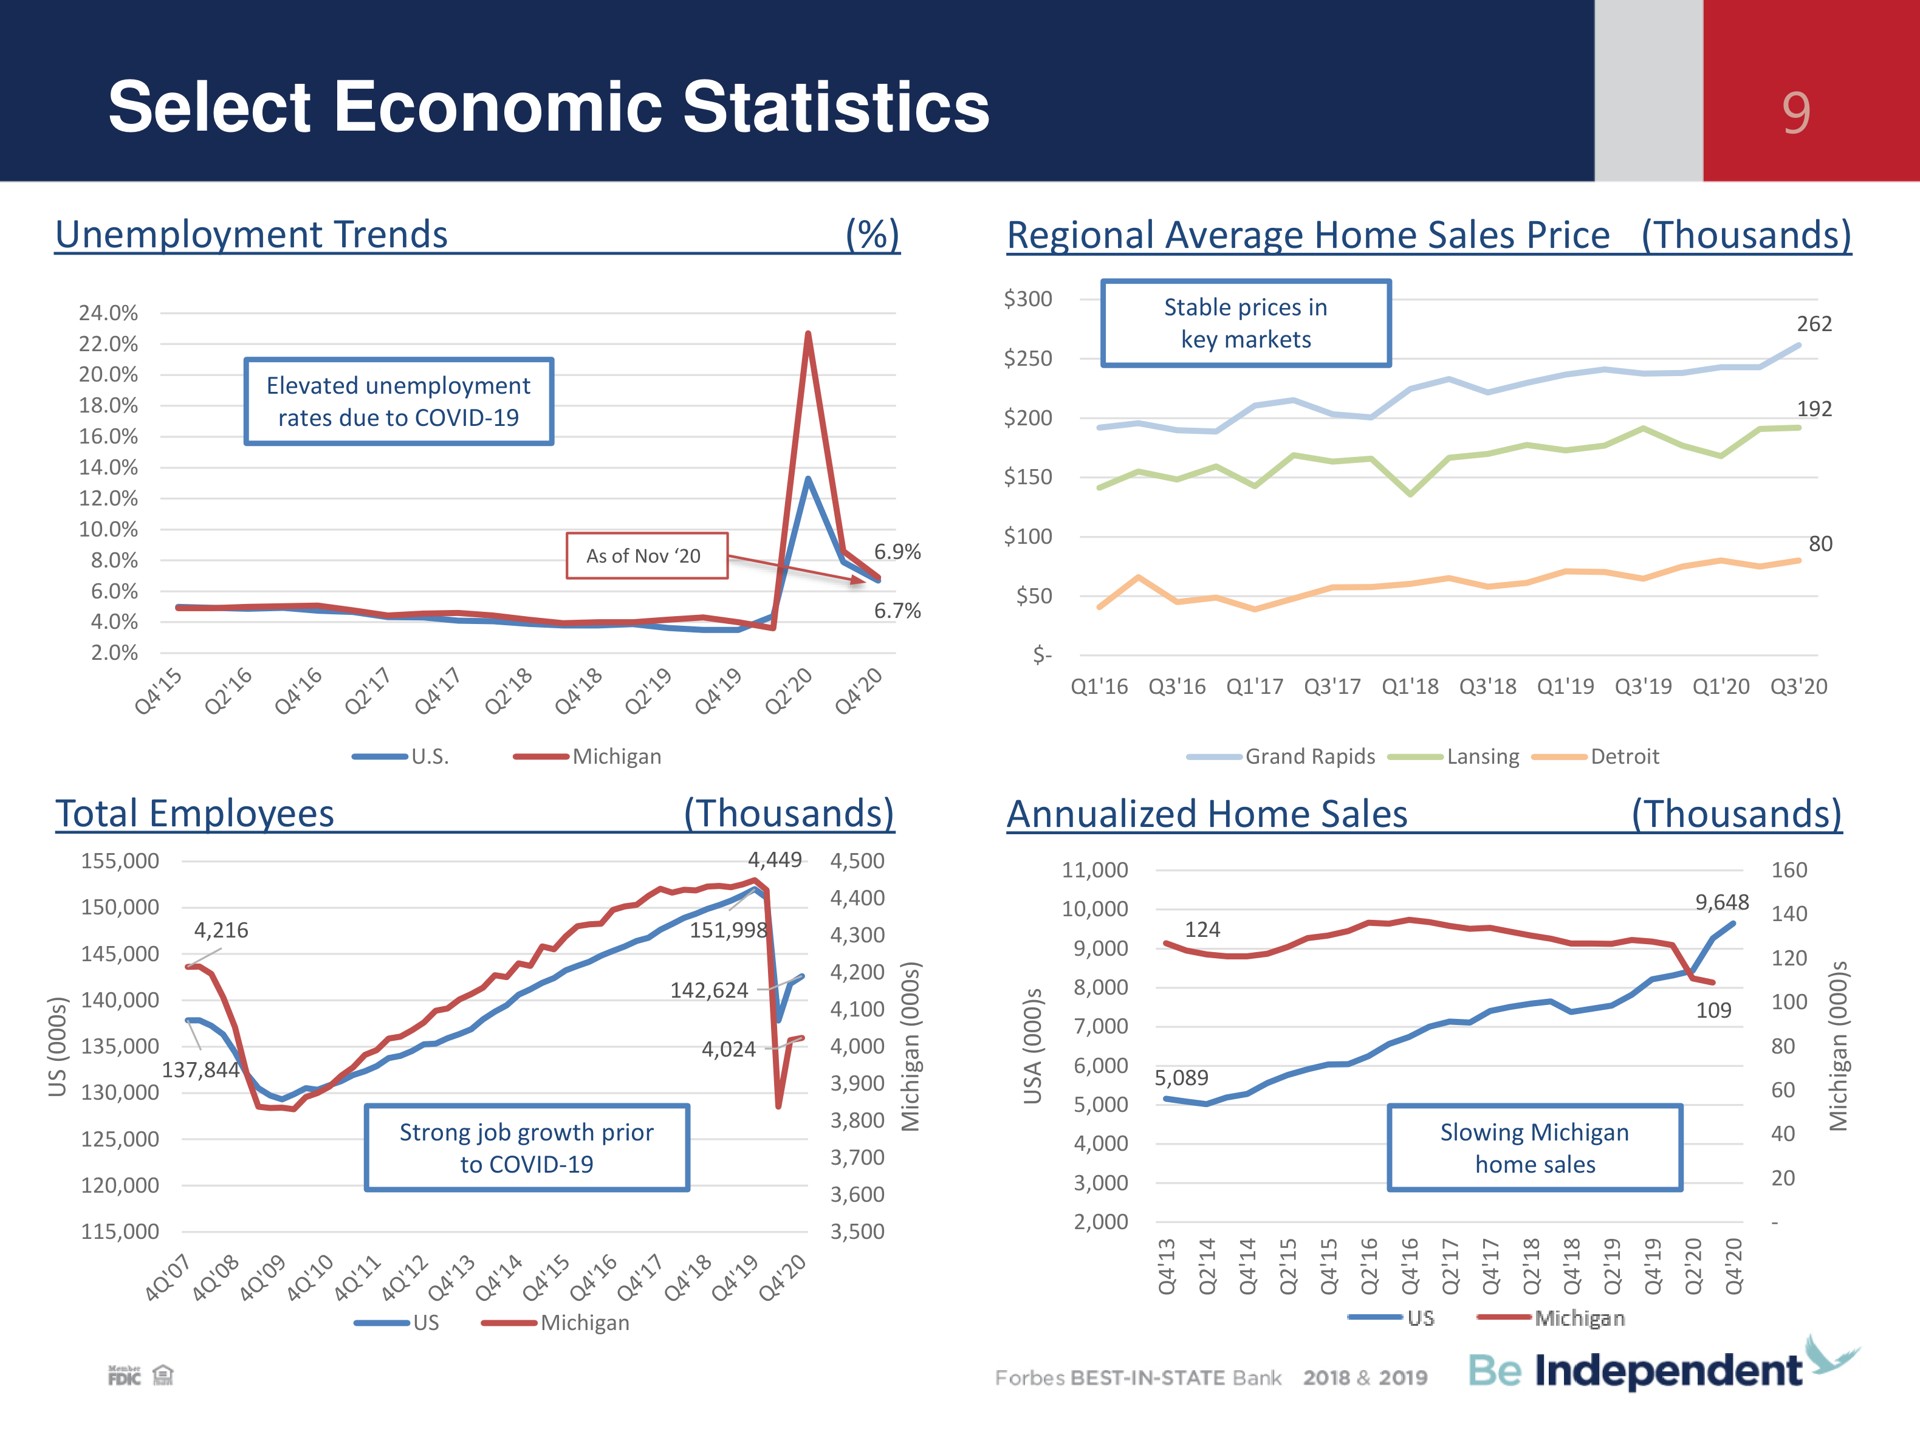 select economic statistics sees | Independent Bank Corp